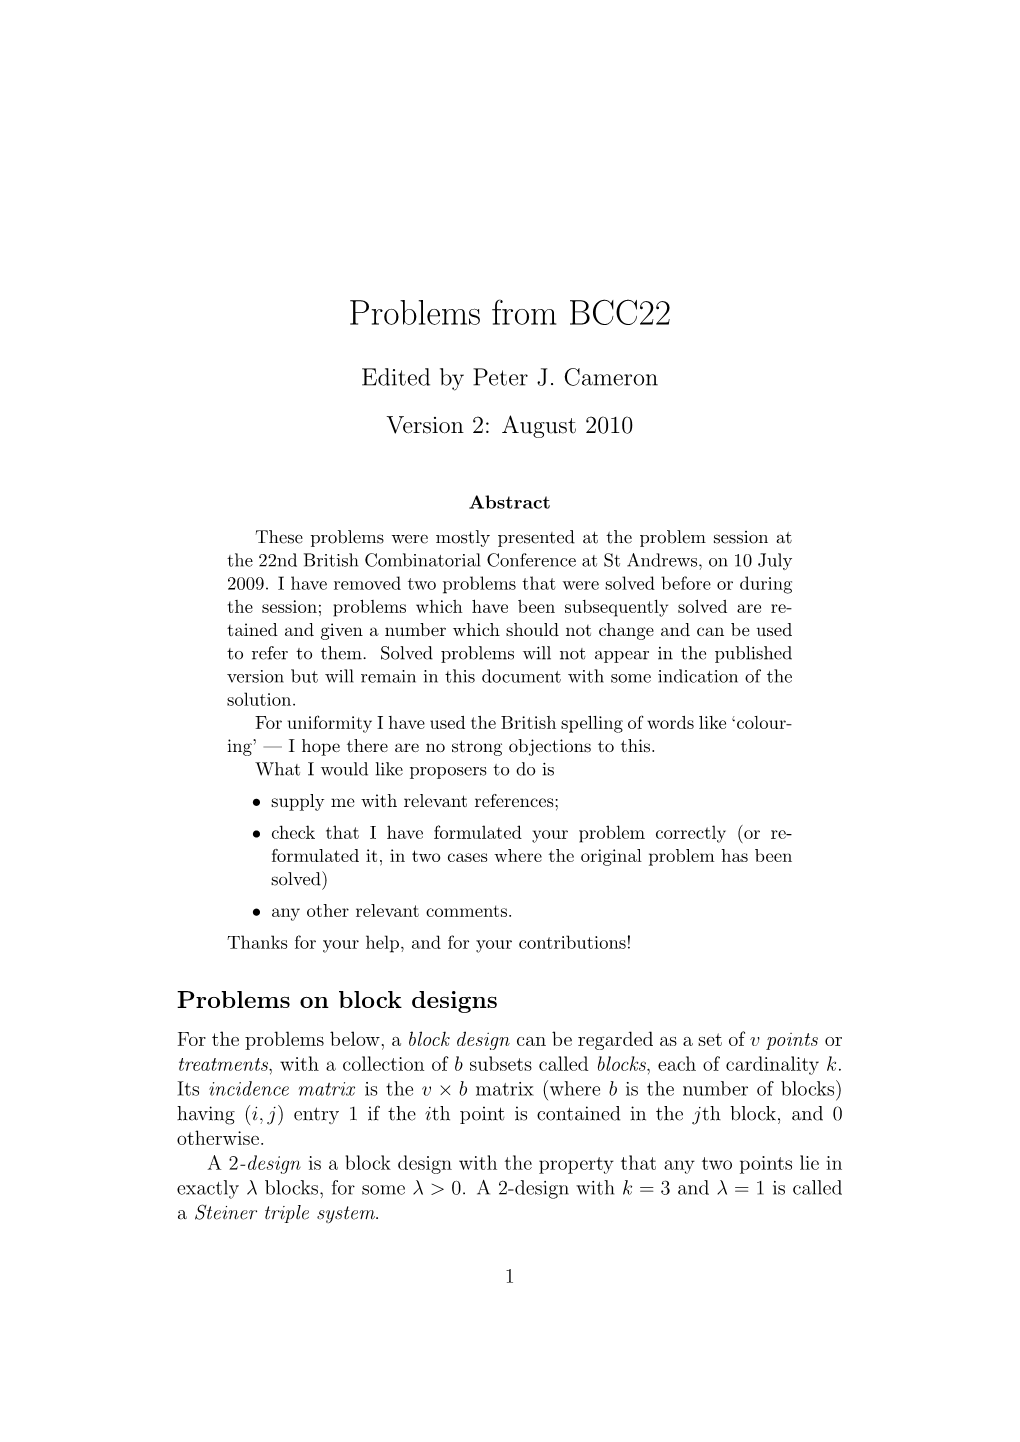 Problems from BCC22